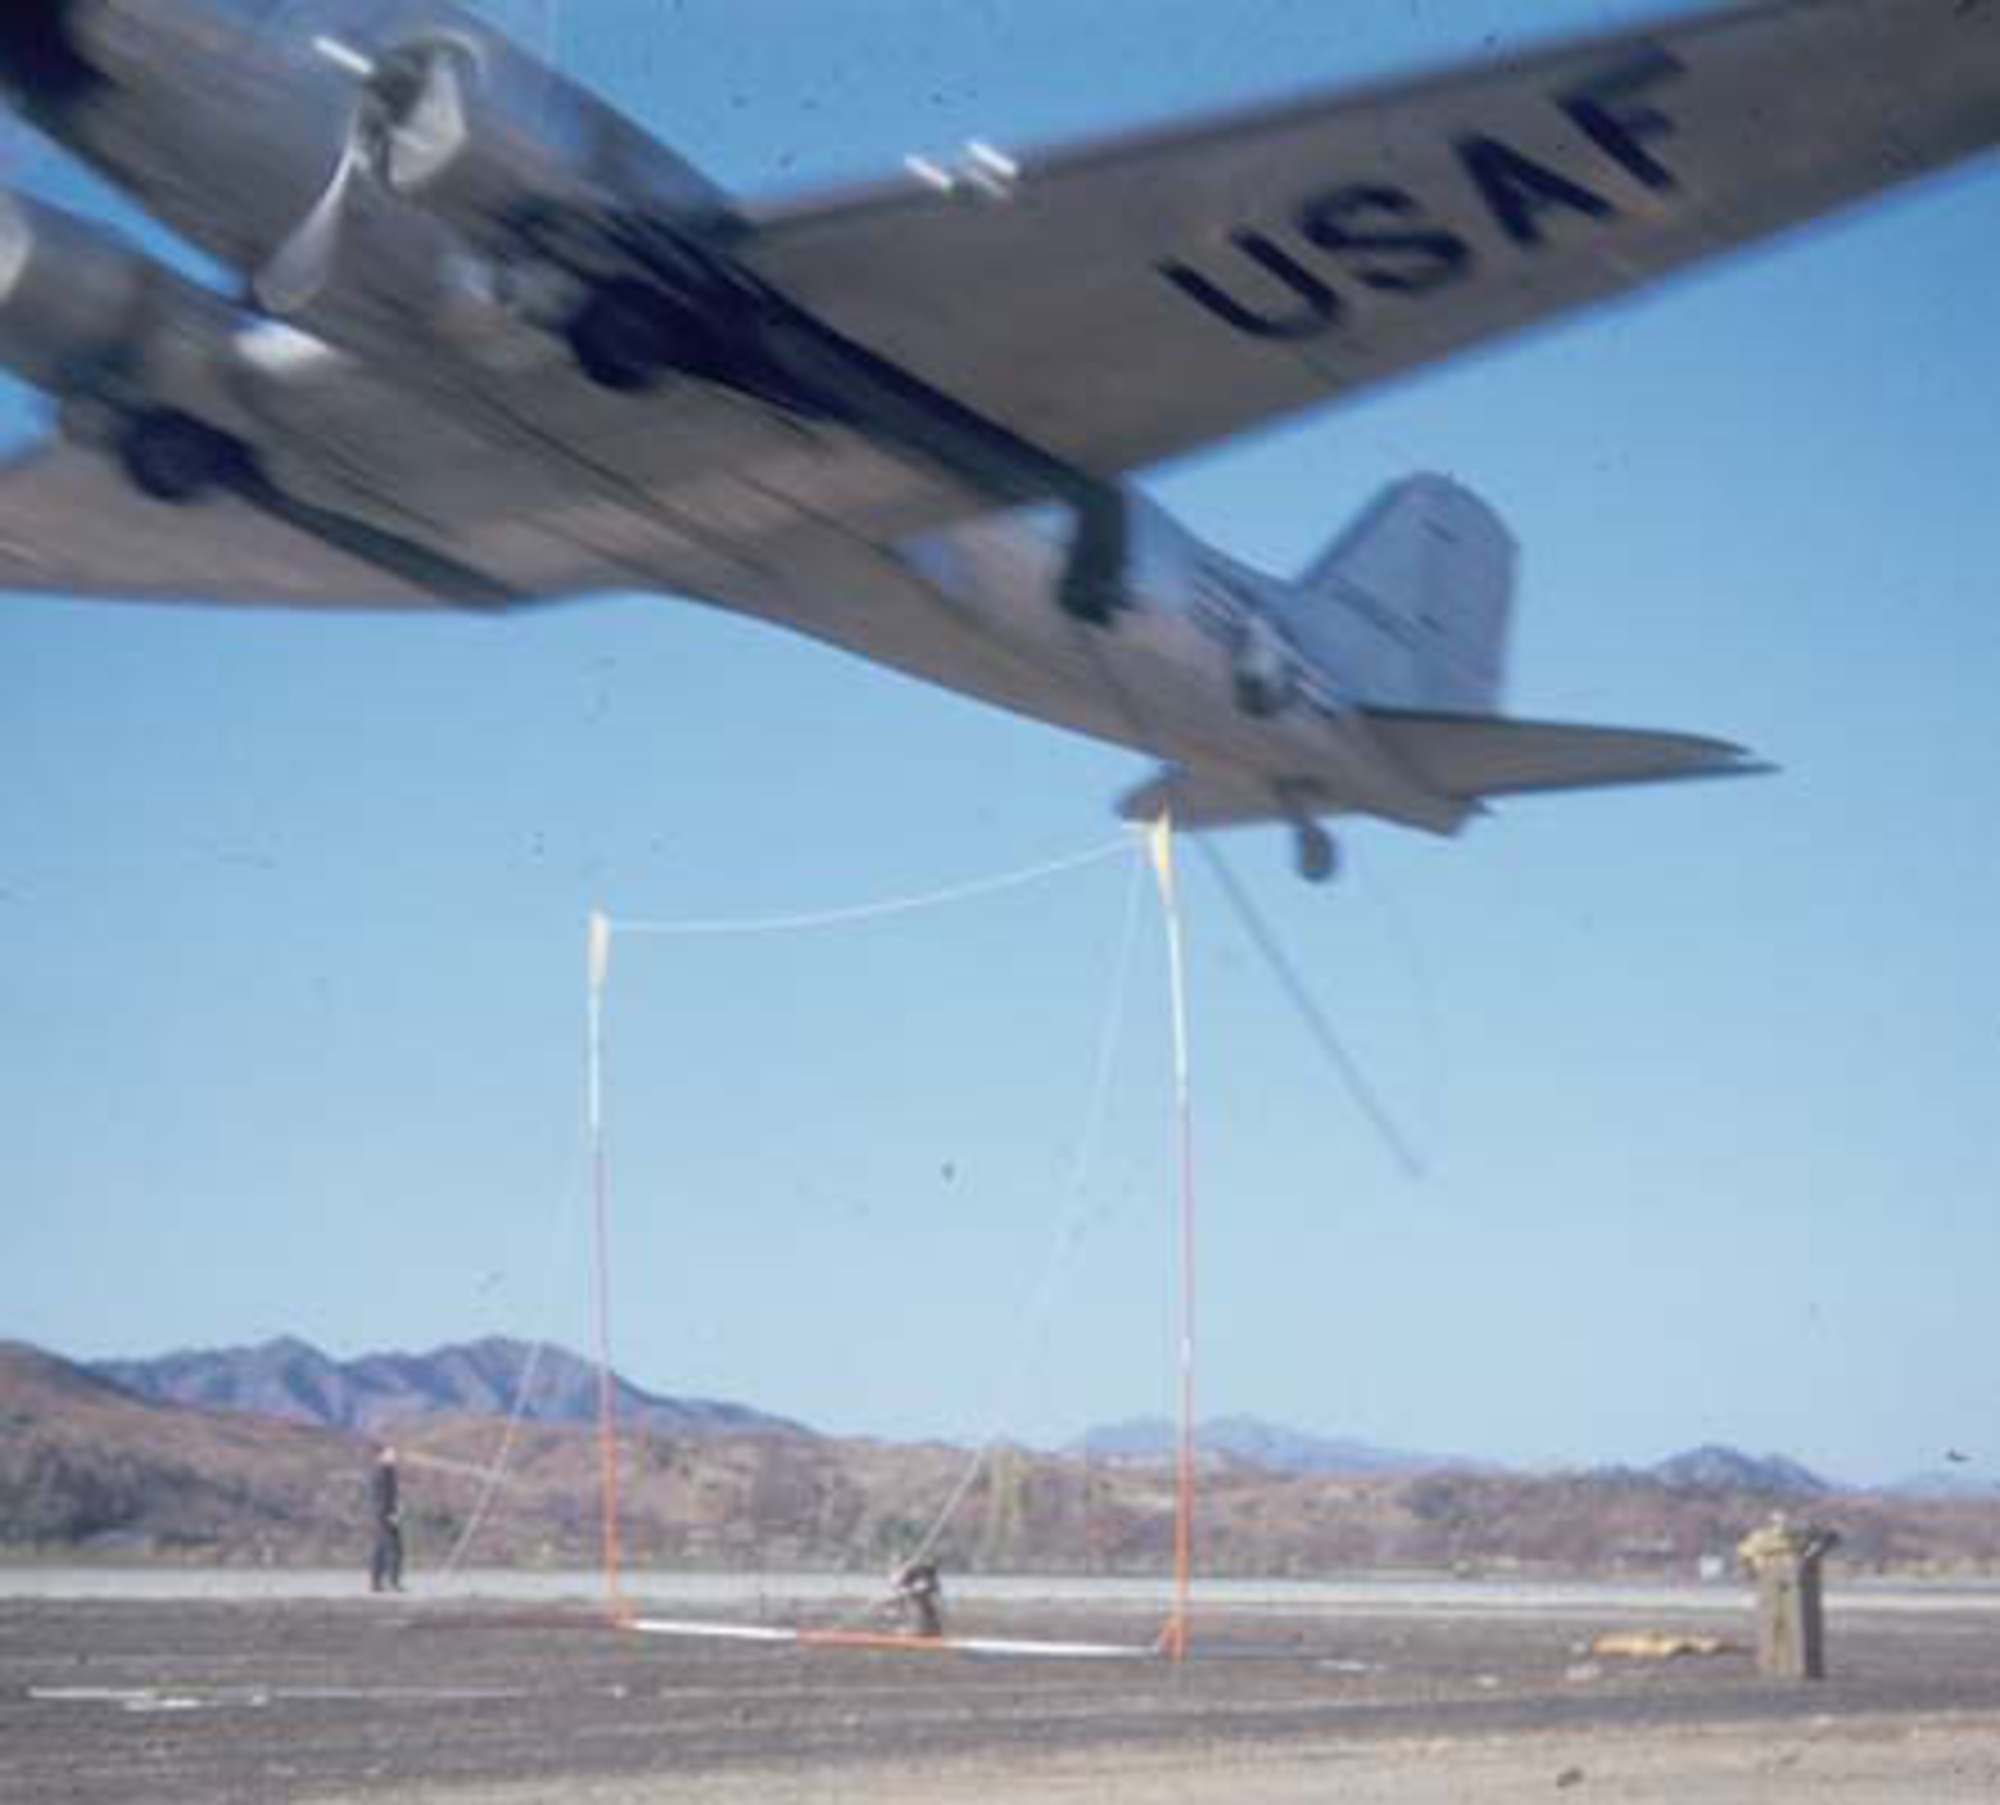 Air Force special operation aircrews experimented with “snatching” personnel from the ground via a hook on a low-flying C-47. (U.S. Air Force photo)